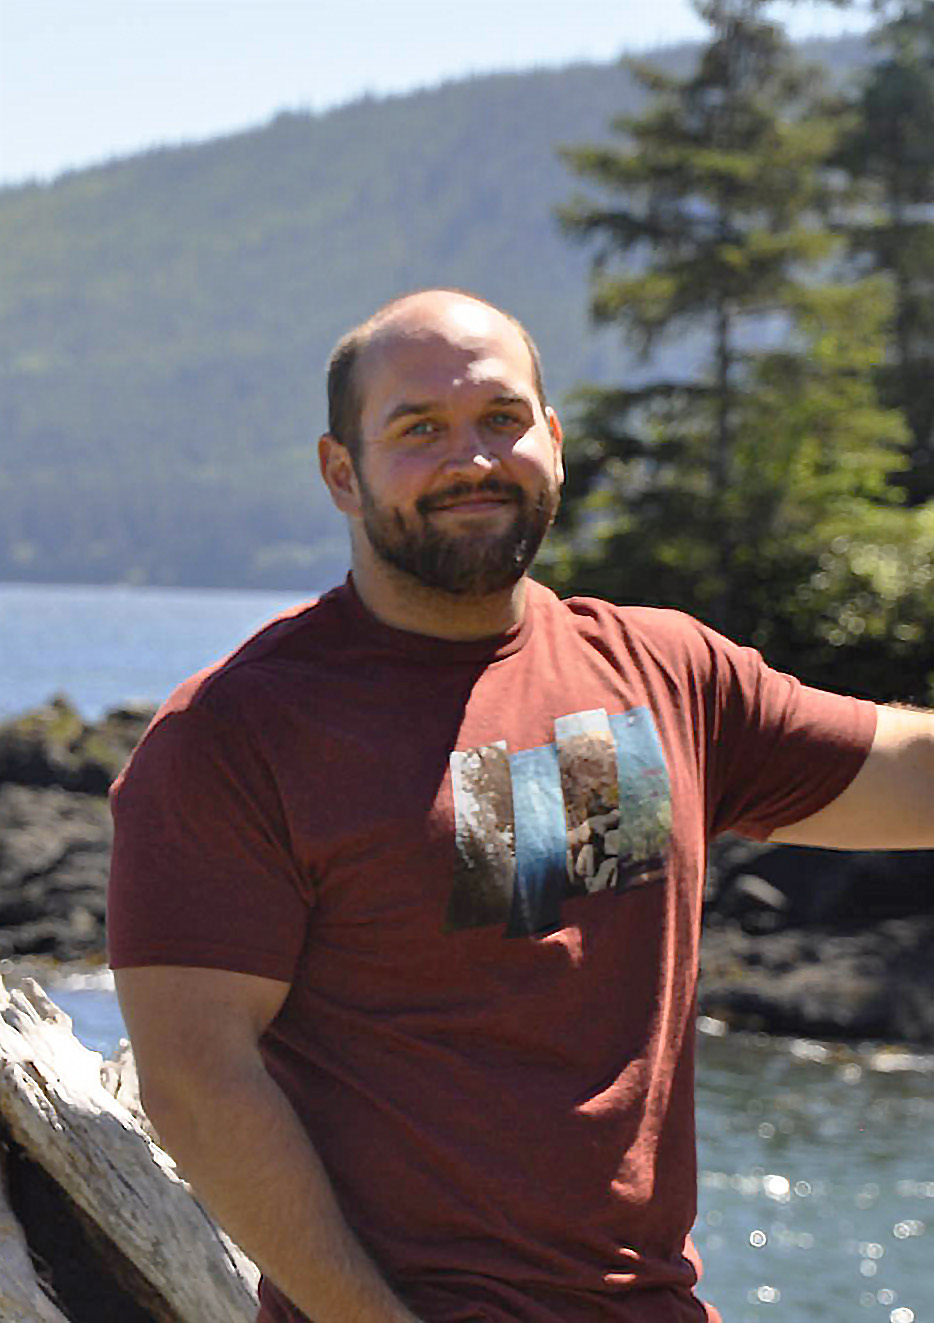 Steve Bennett wearing a reddish orange t-shirt with a graphic on it standing near a glistening mountain lake